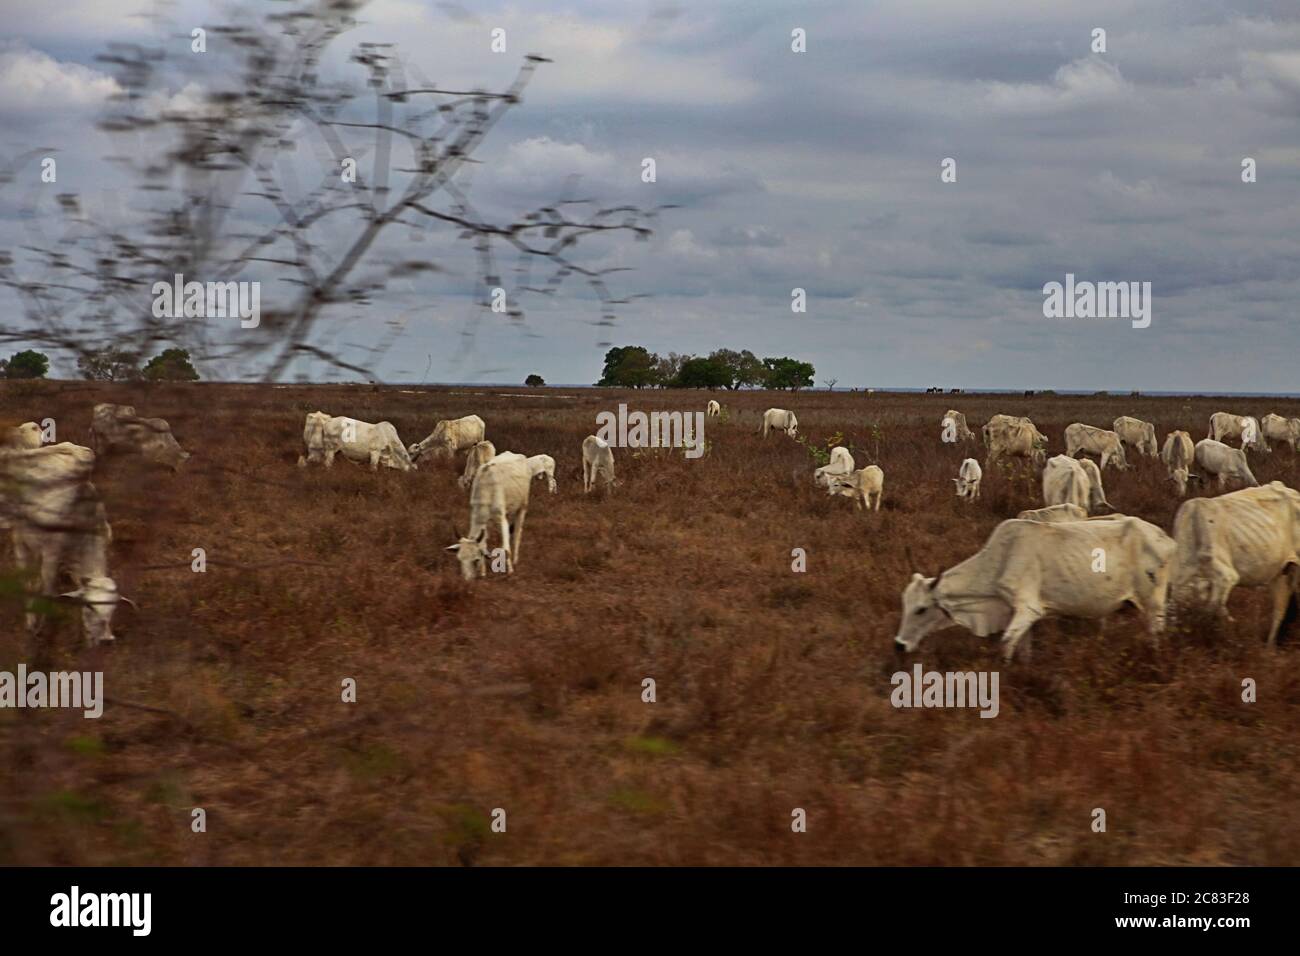 Cattles grazing on a dry grassland during dry season in Sumba Island, Indonesia. Stock Photo